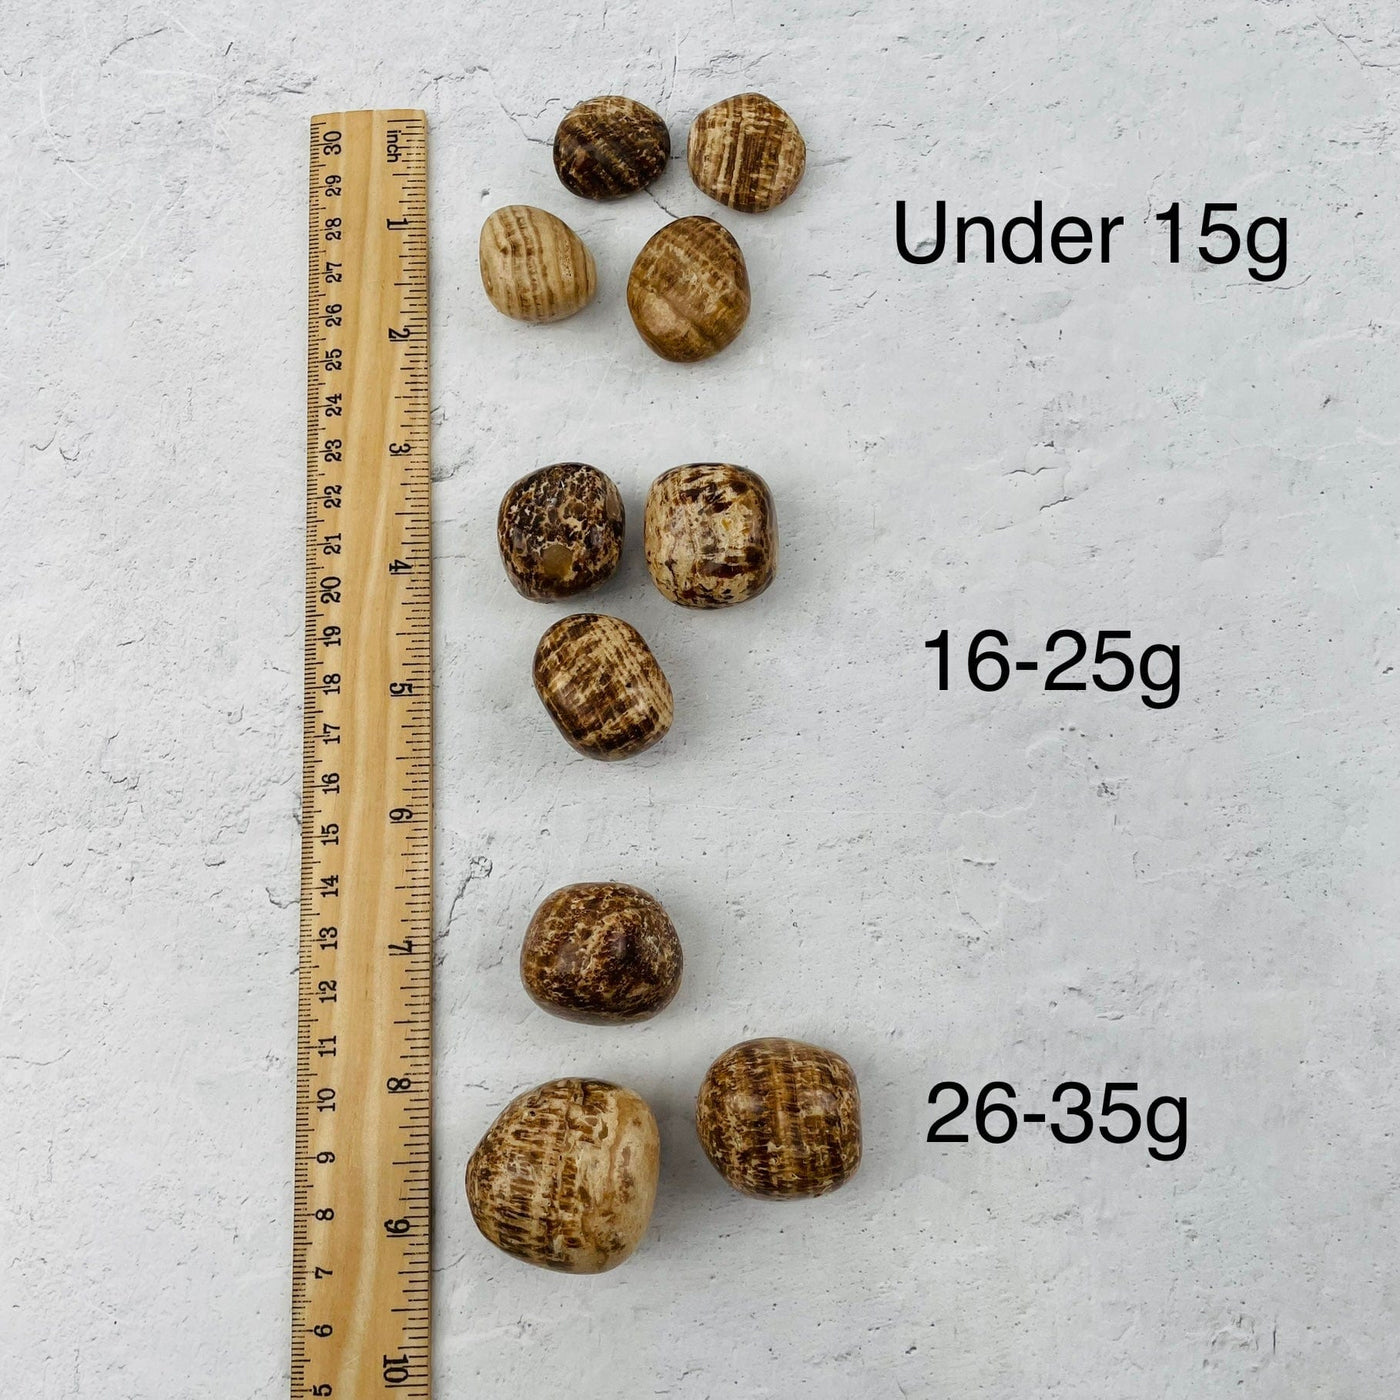 Aragonite Tumbled Stone - Polished Stones - Choose by Weight. next to a ruler for size reference 